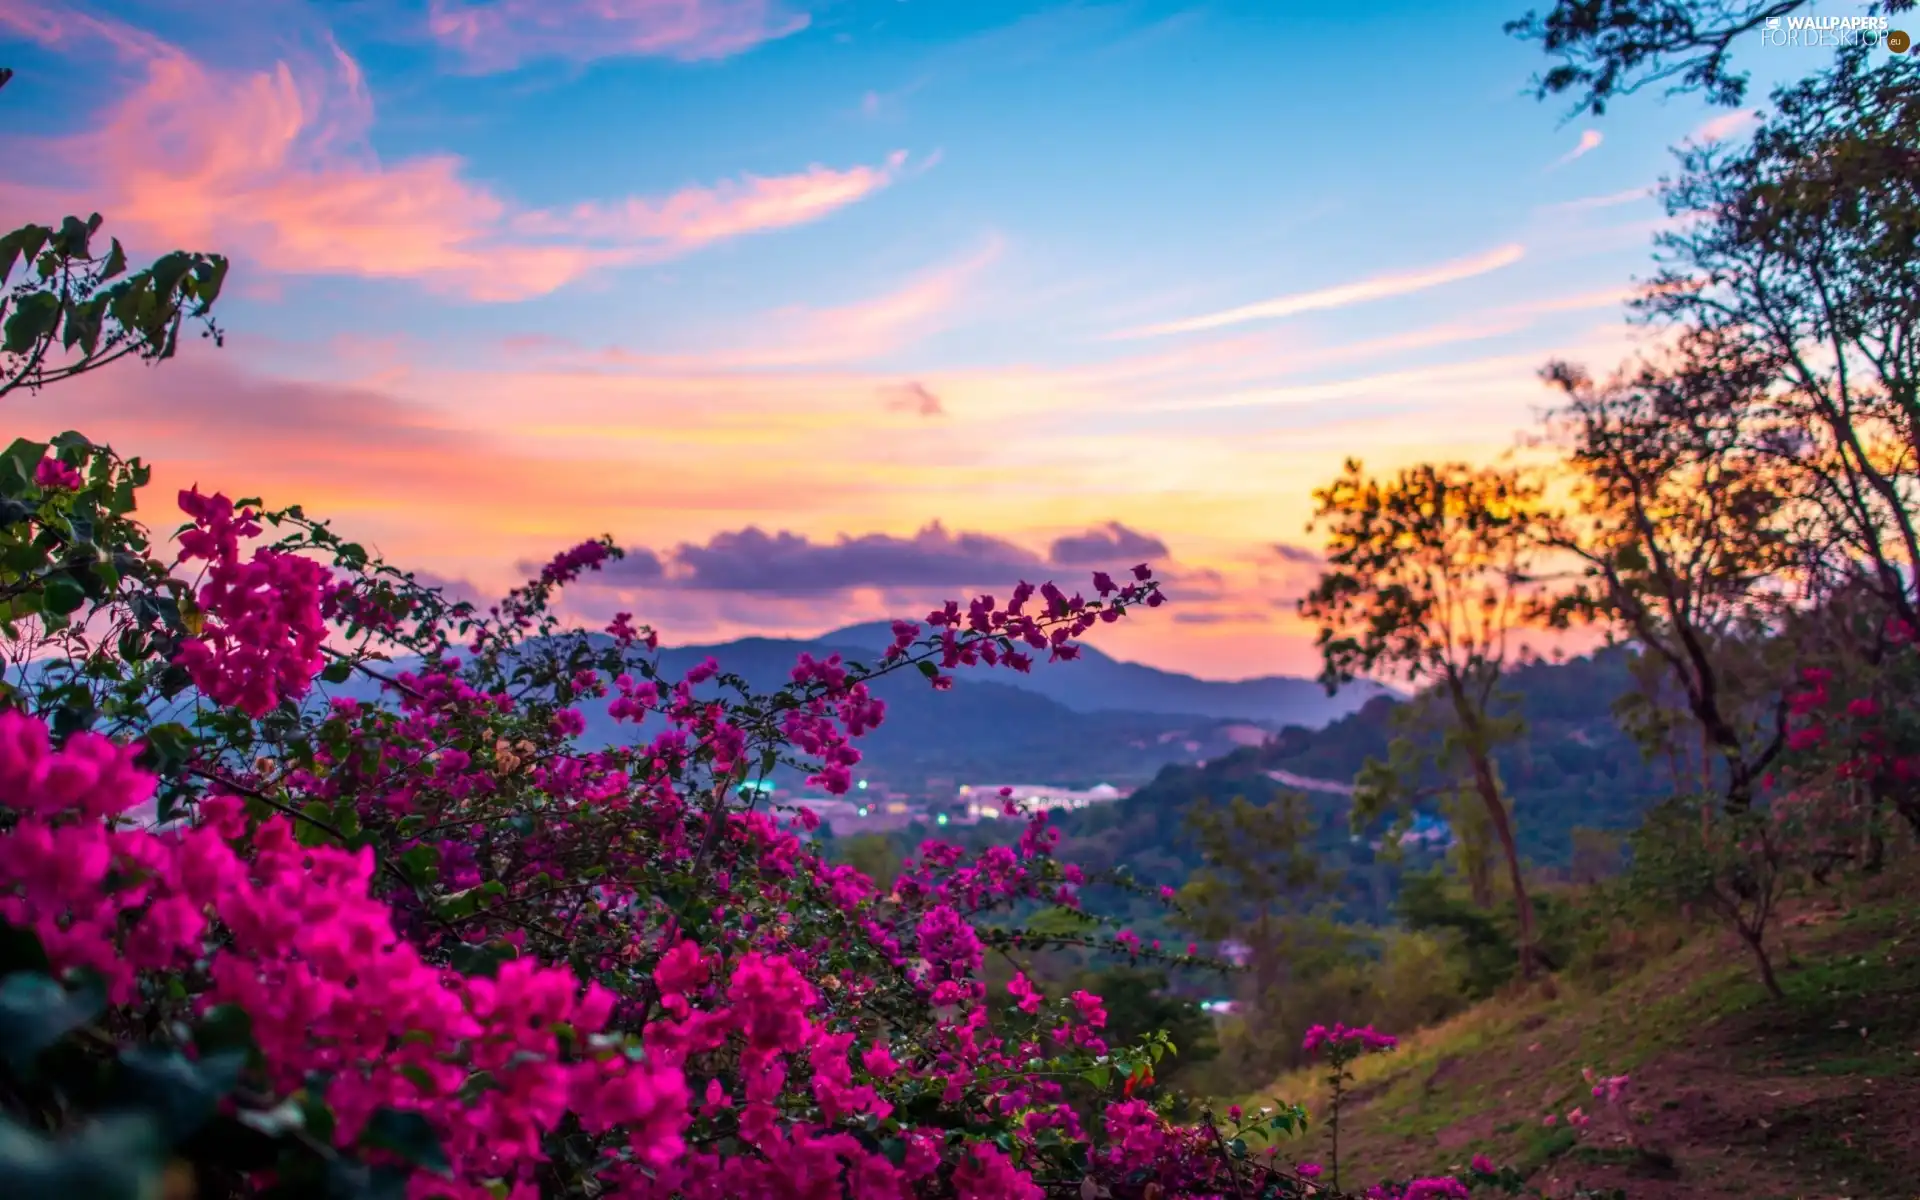 west, The Hills, pink Flowers, sun